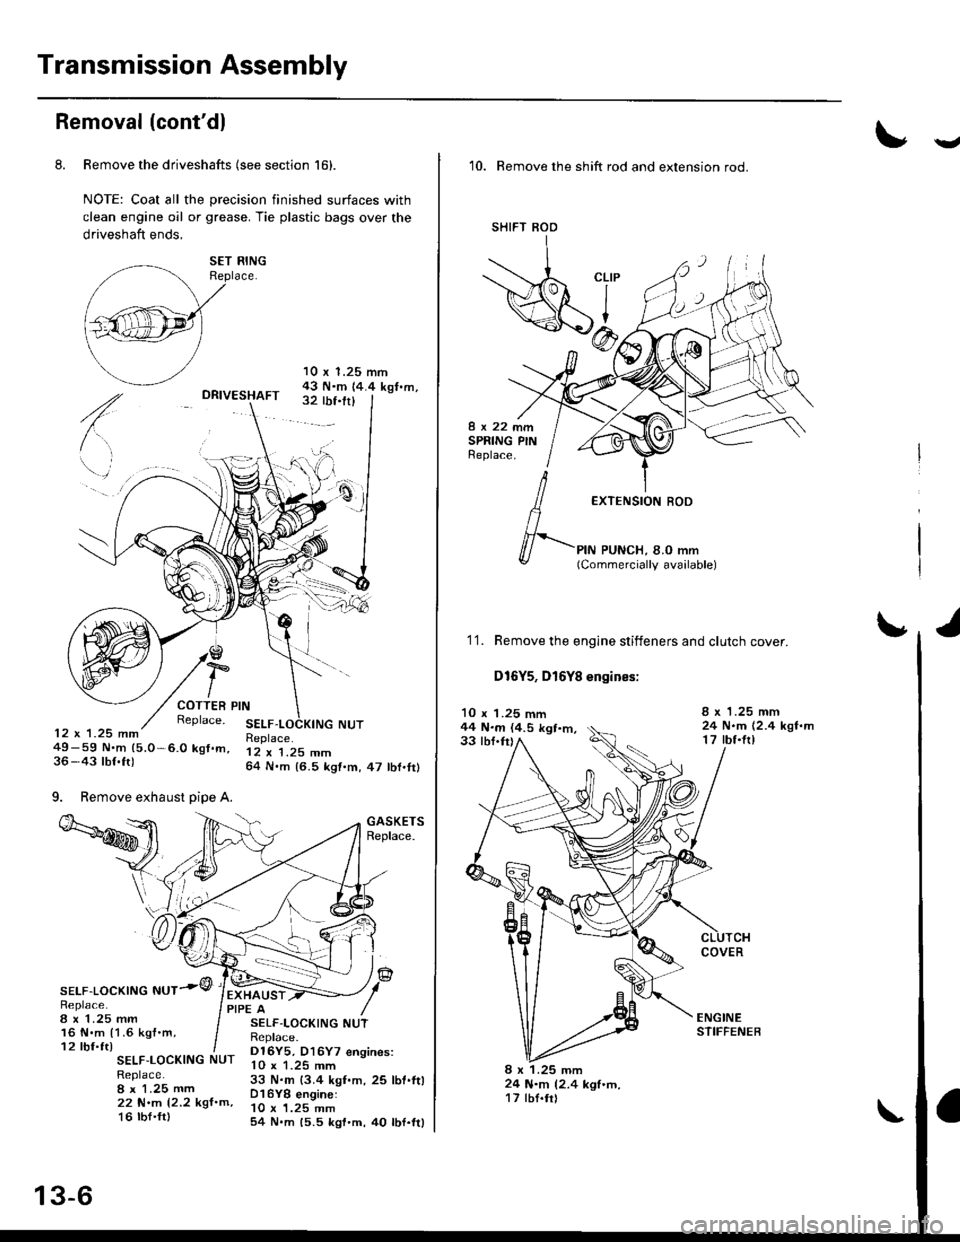 HONDA CIVIC 2000 6.G Workshop Manual Transmission Assembly
Removal (contdl
8. Remove the driveshafts (see section 161.
NOTE: Coat all the precision finished surfaces with
clean engine oil or grease. Tie plastic bags over the
driveshaft 